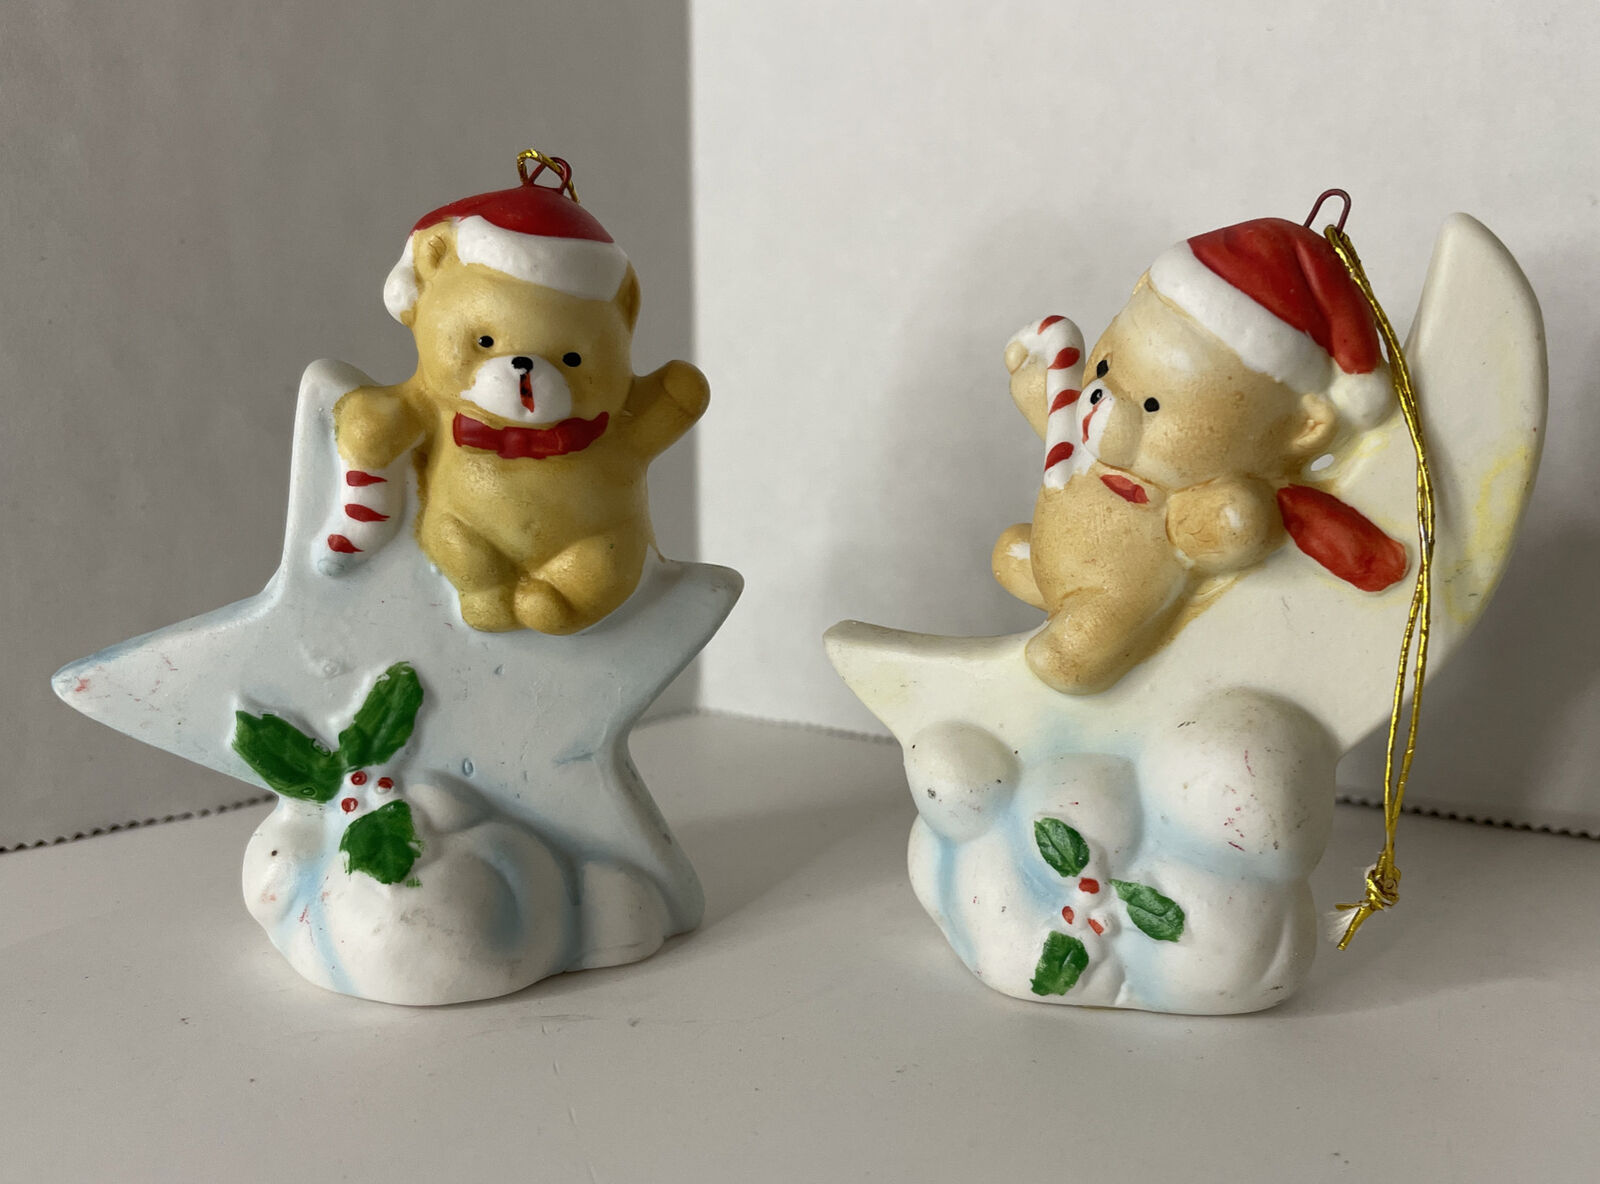 1986 Lot Of 2 Christmas Porcelain Bisque Heavenly Bear Ornaments Vintage Taiwan